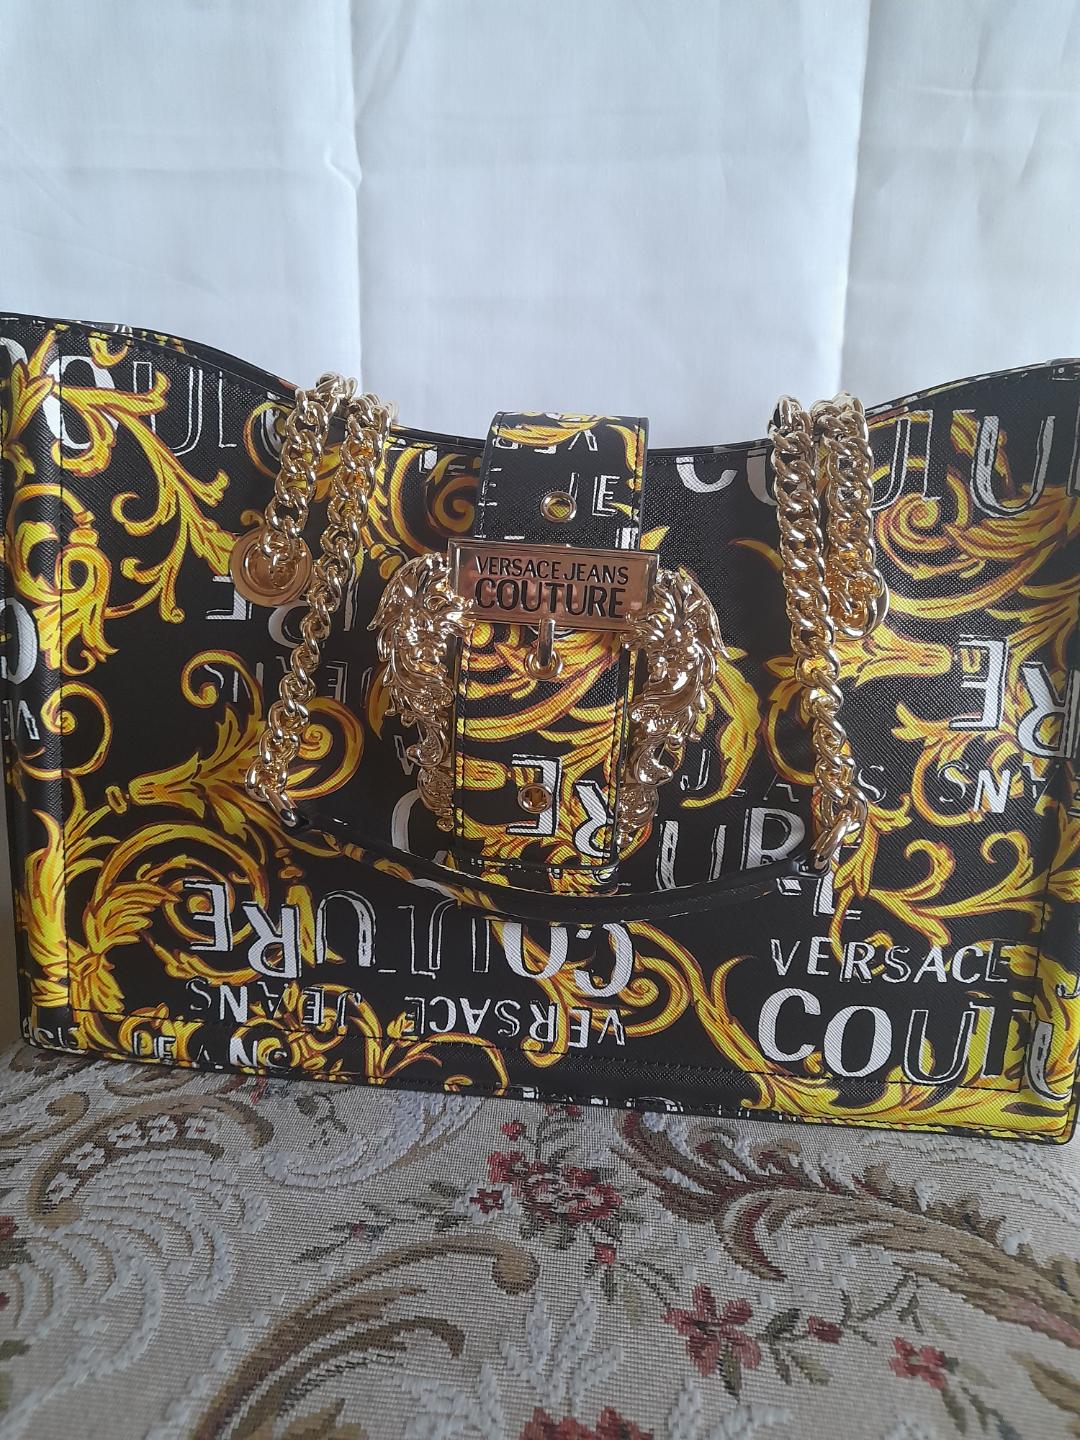 Totes bags Versace Jeans Couture - Barocco-print bag with buckle -  74VA4BFIZS597G89